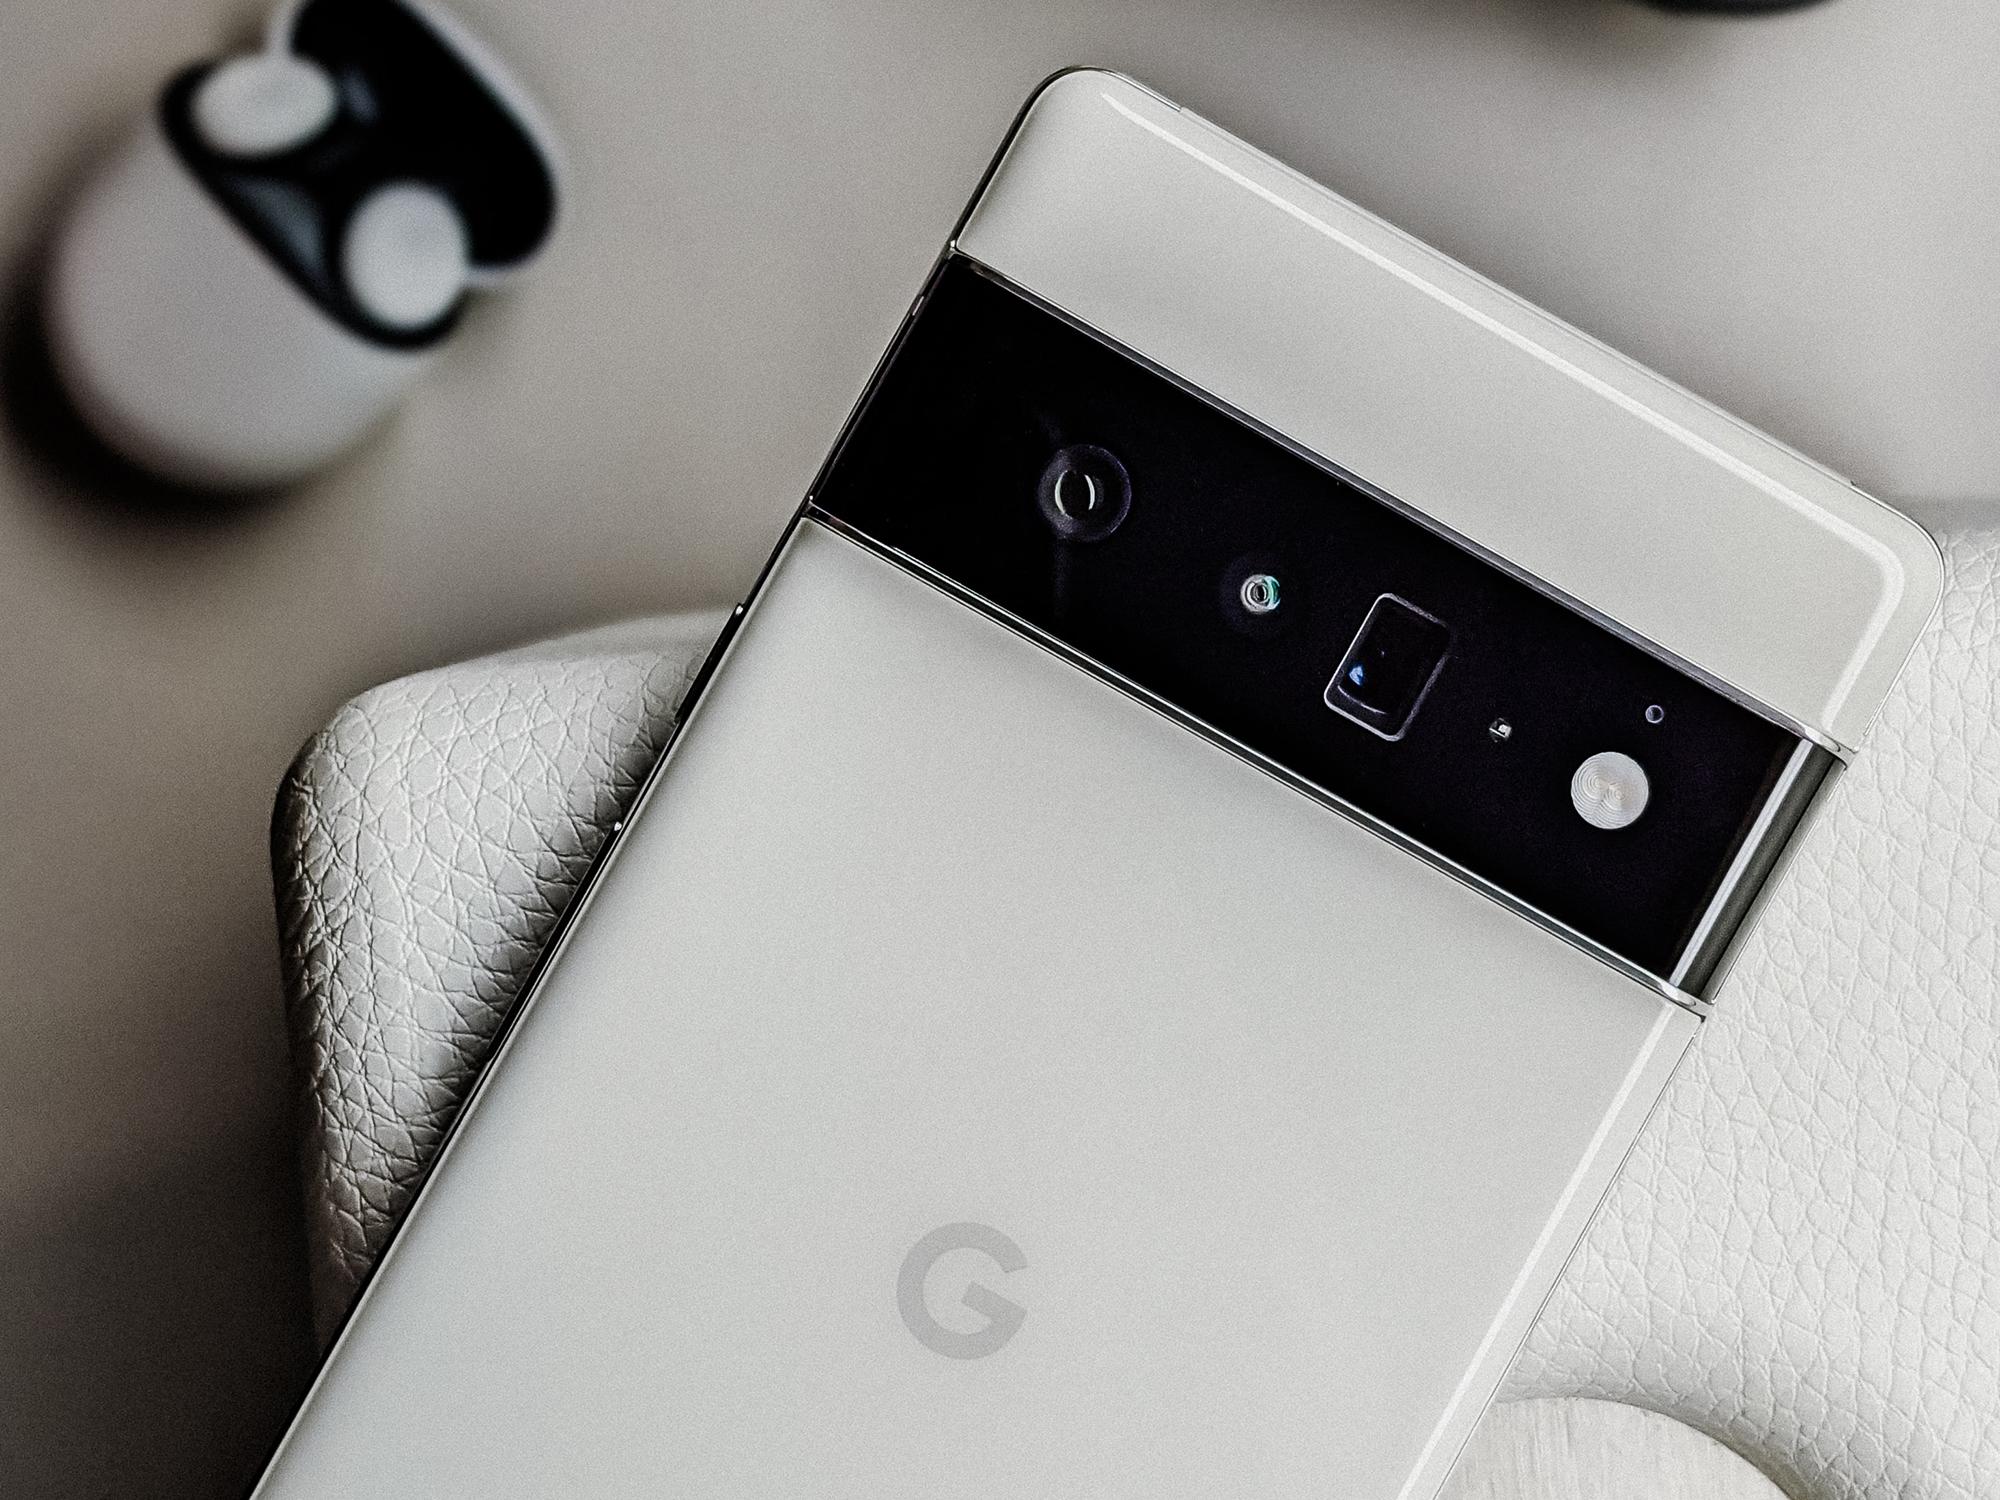 6 cool camera tricks to try on the new Pixel 6 phones